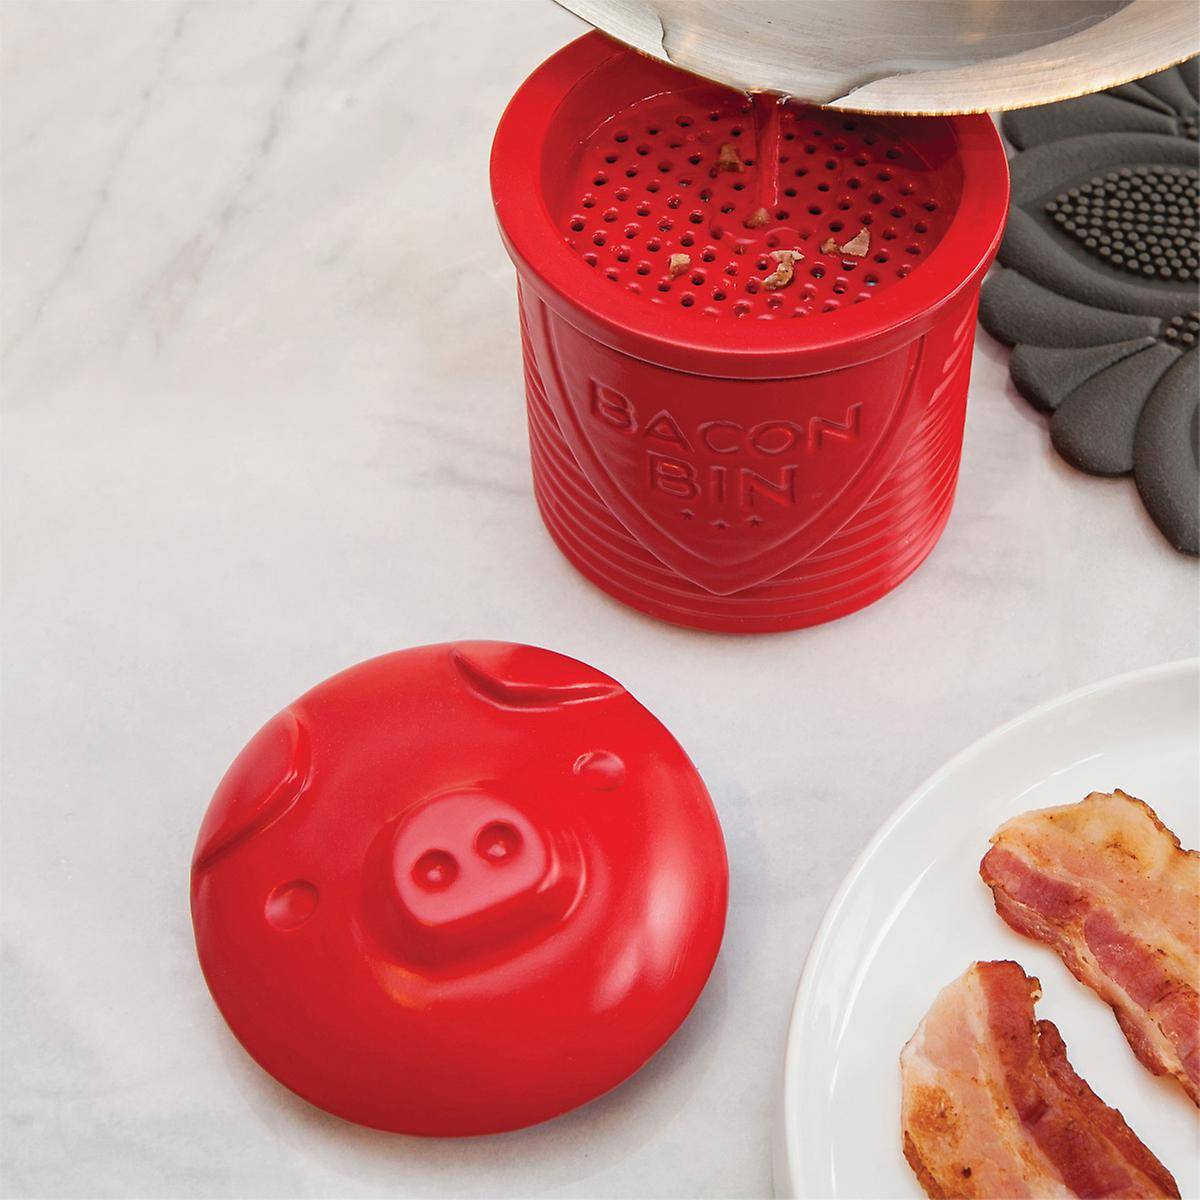 11 of the best cooking tools to give as stocking stuffers